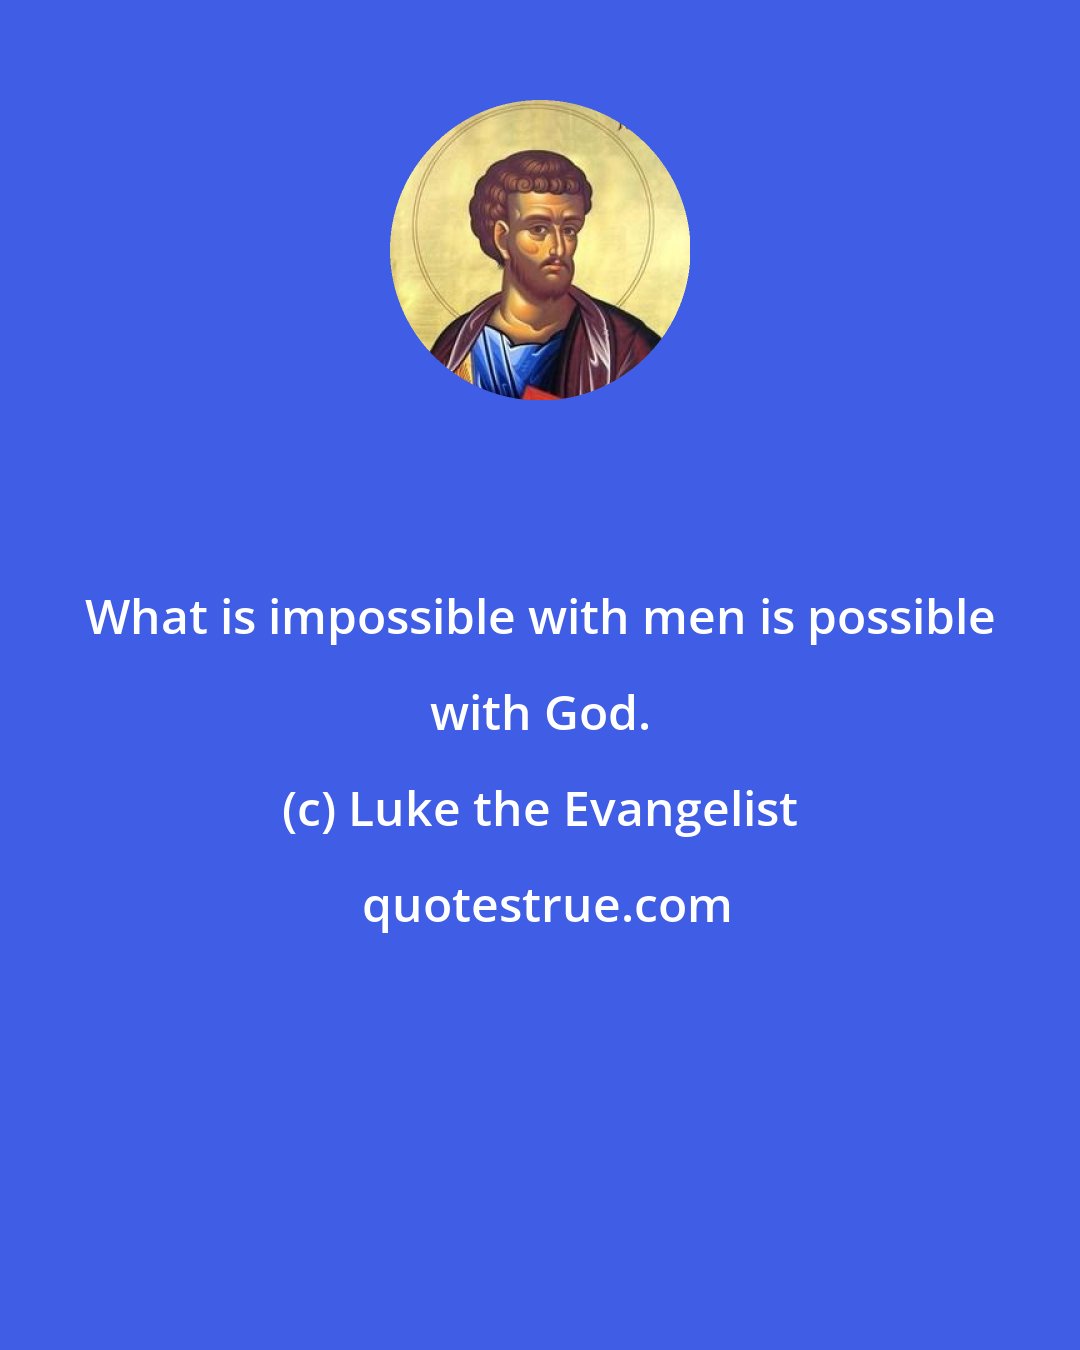 Luke the Evangelist: What is impossible with men is possible with God.